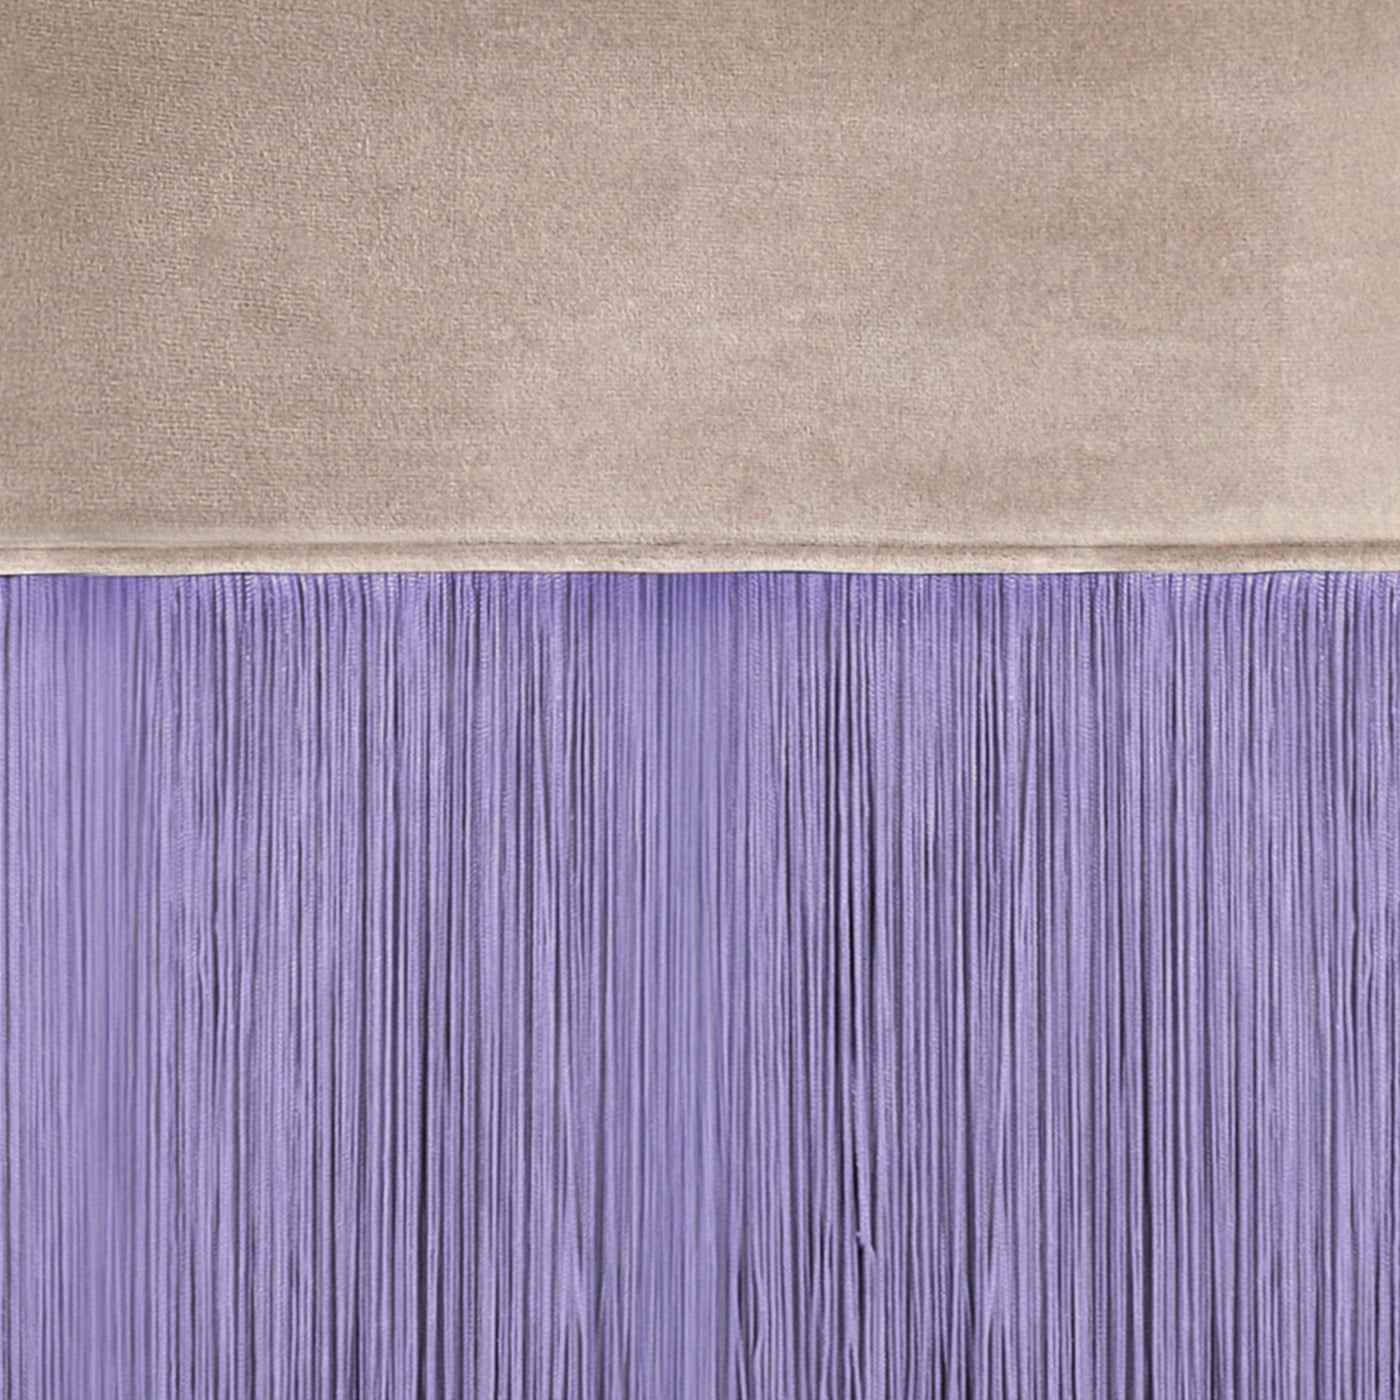 Fringed Beige & Lilac Bench - Alternative view 1